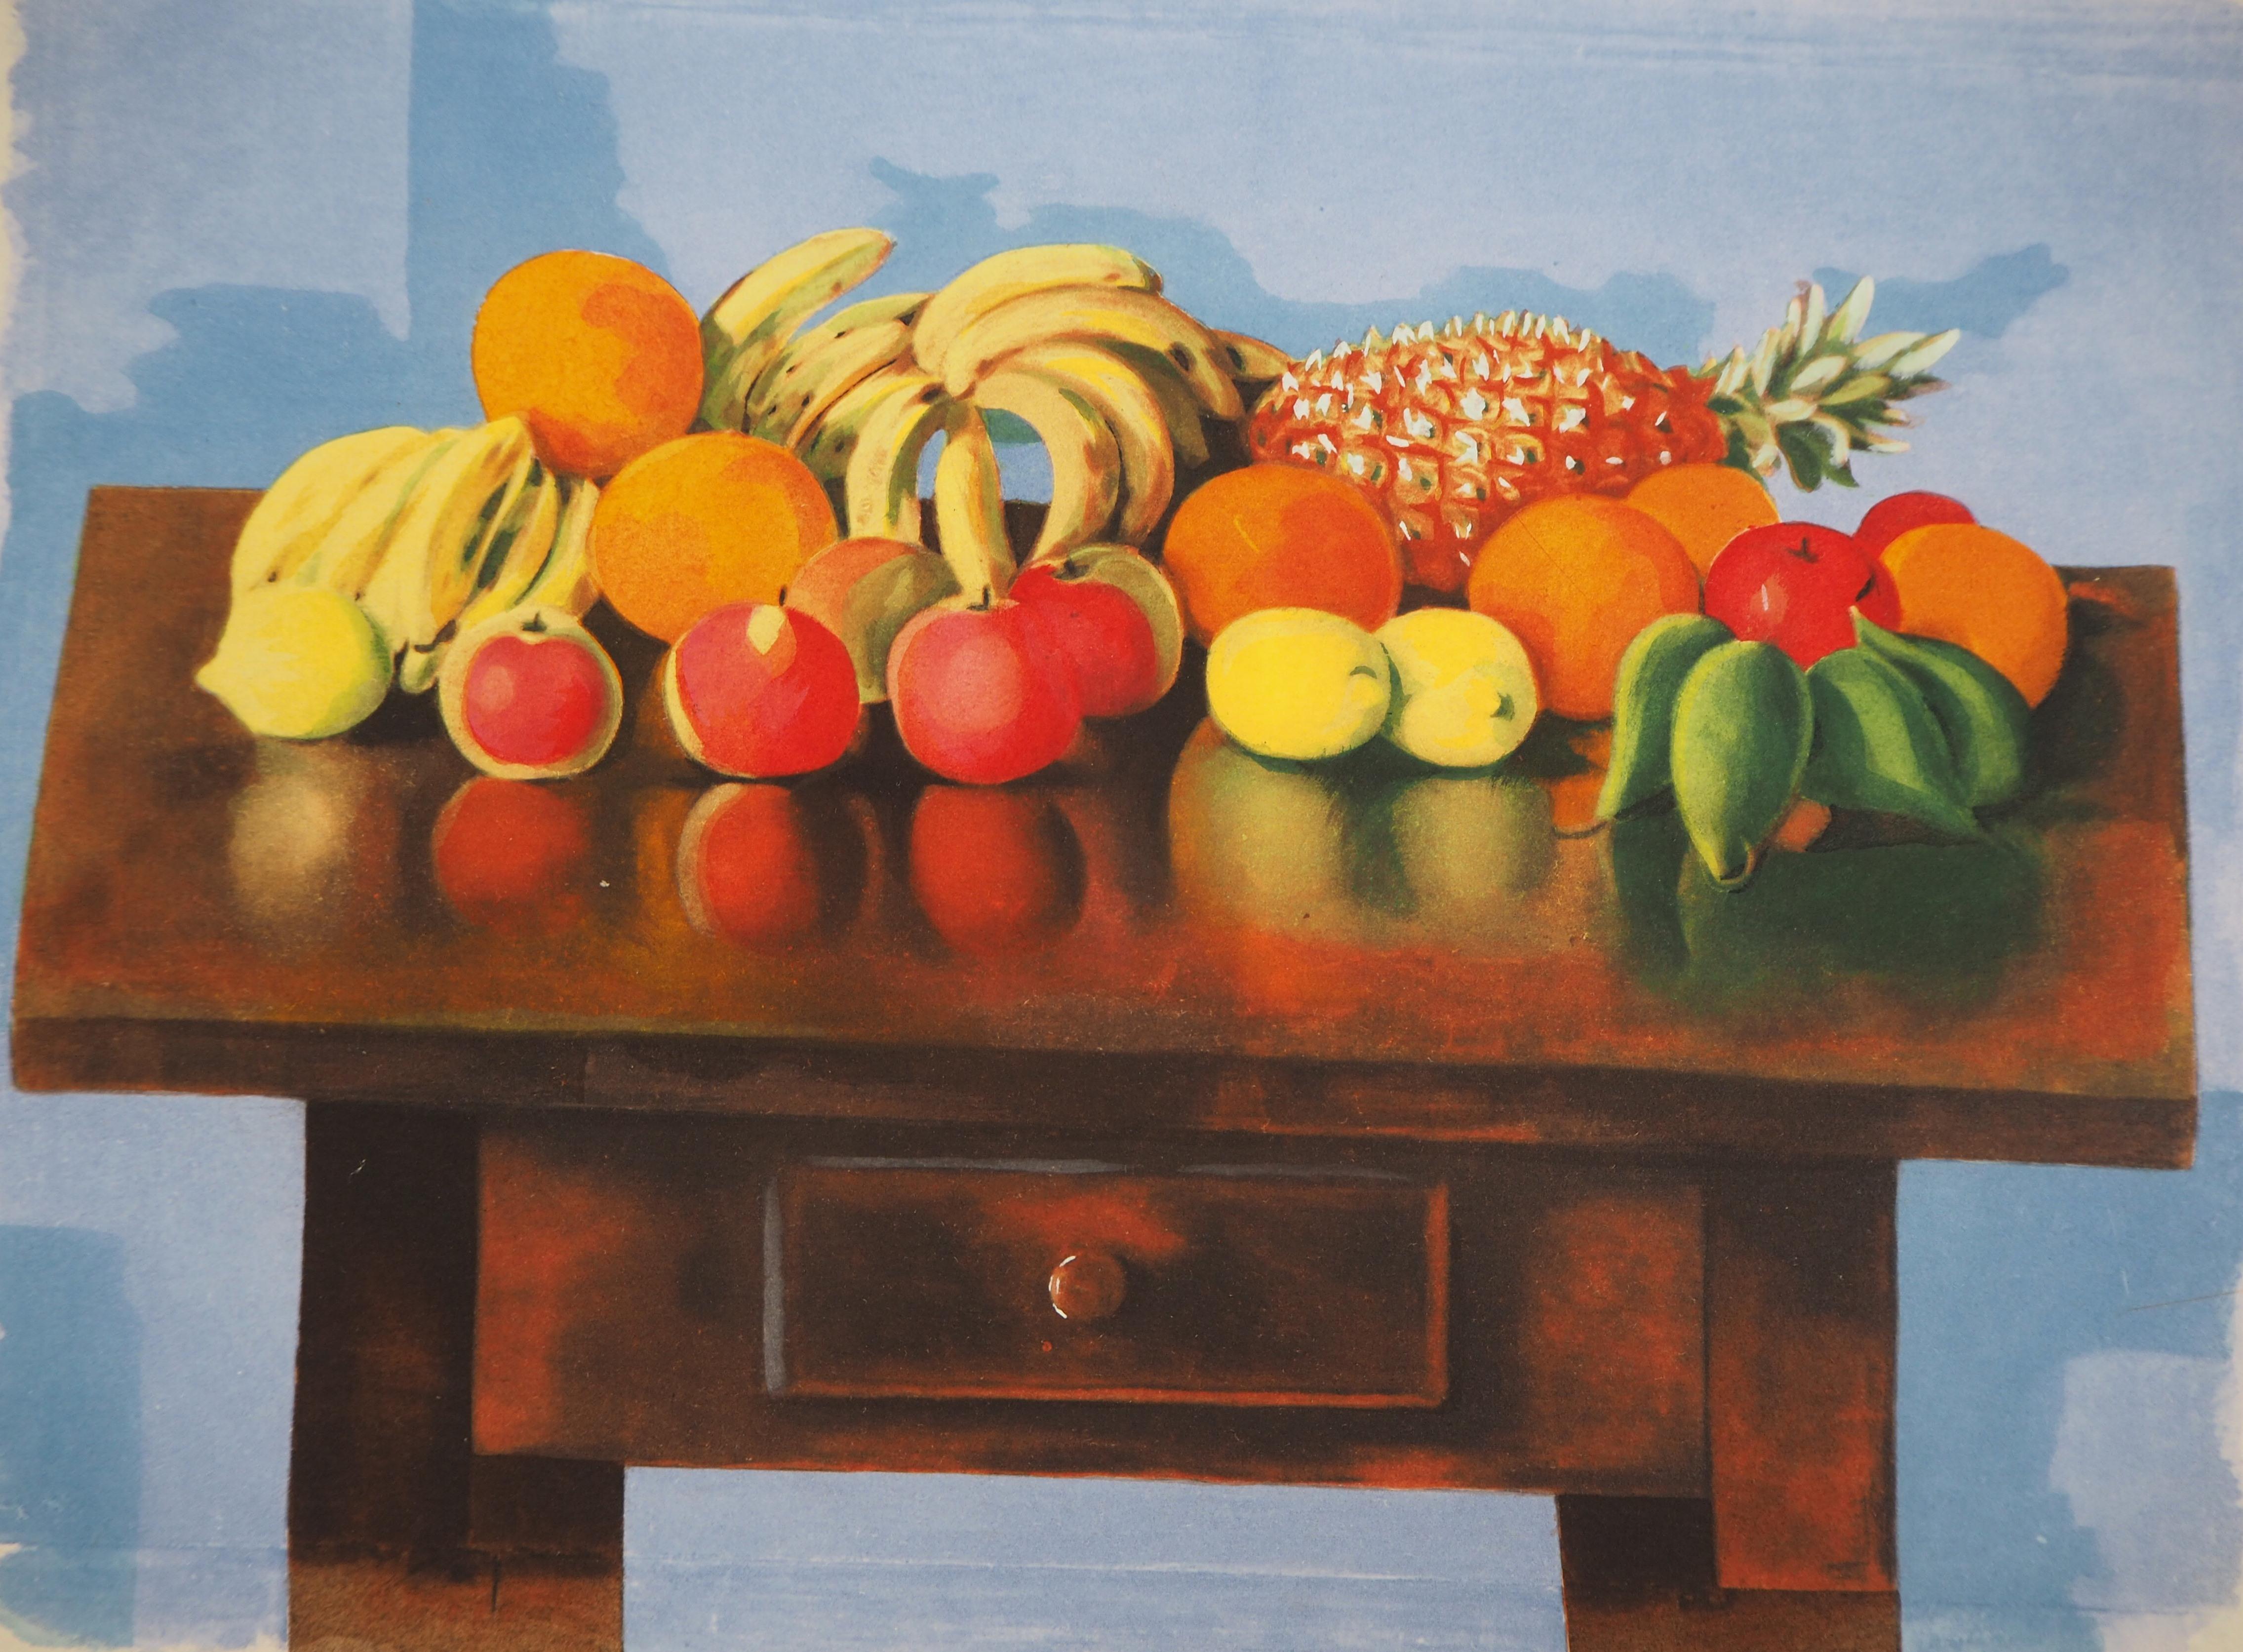 Table of Summer Fruits - Original Lithograph - Print by Moise Kisling